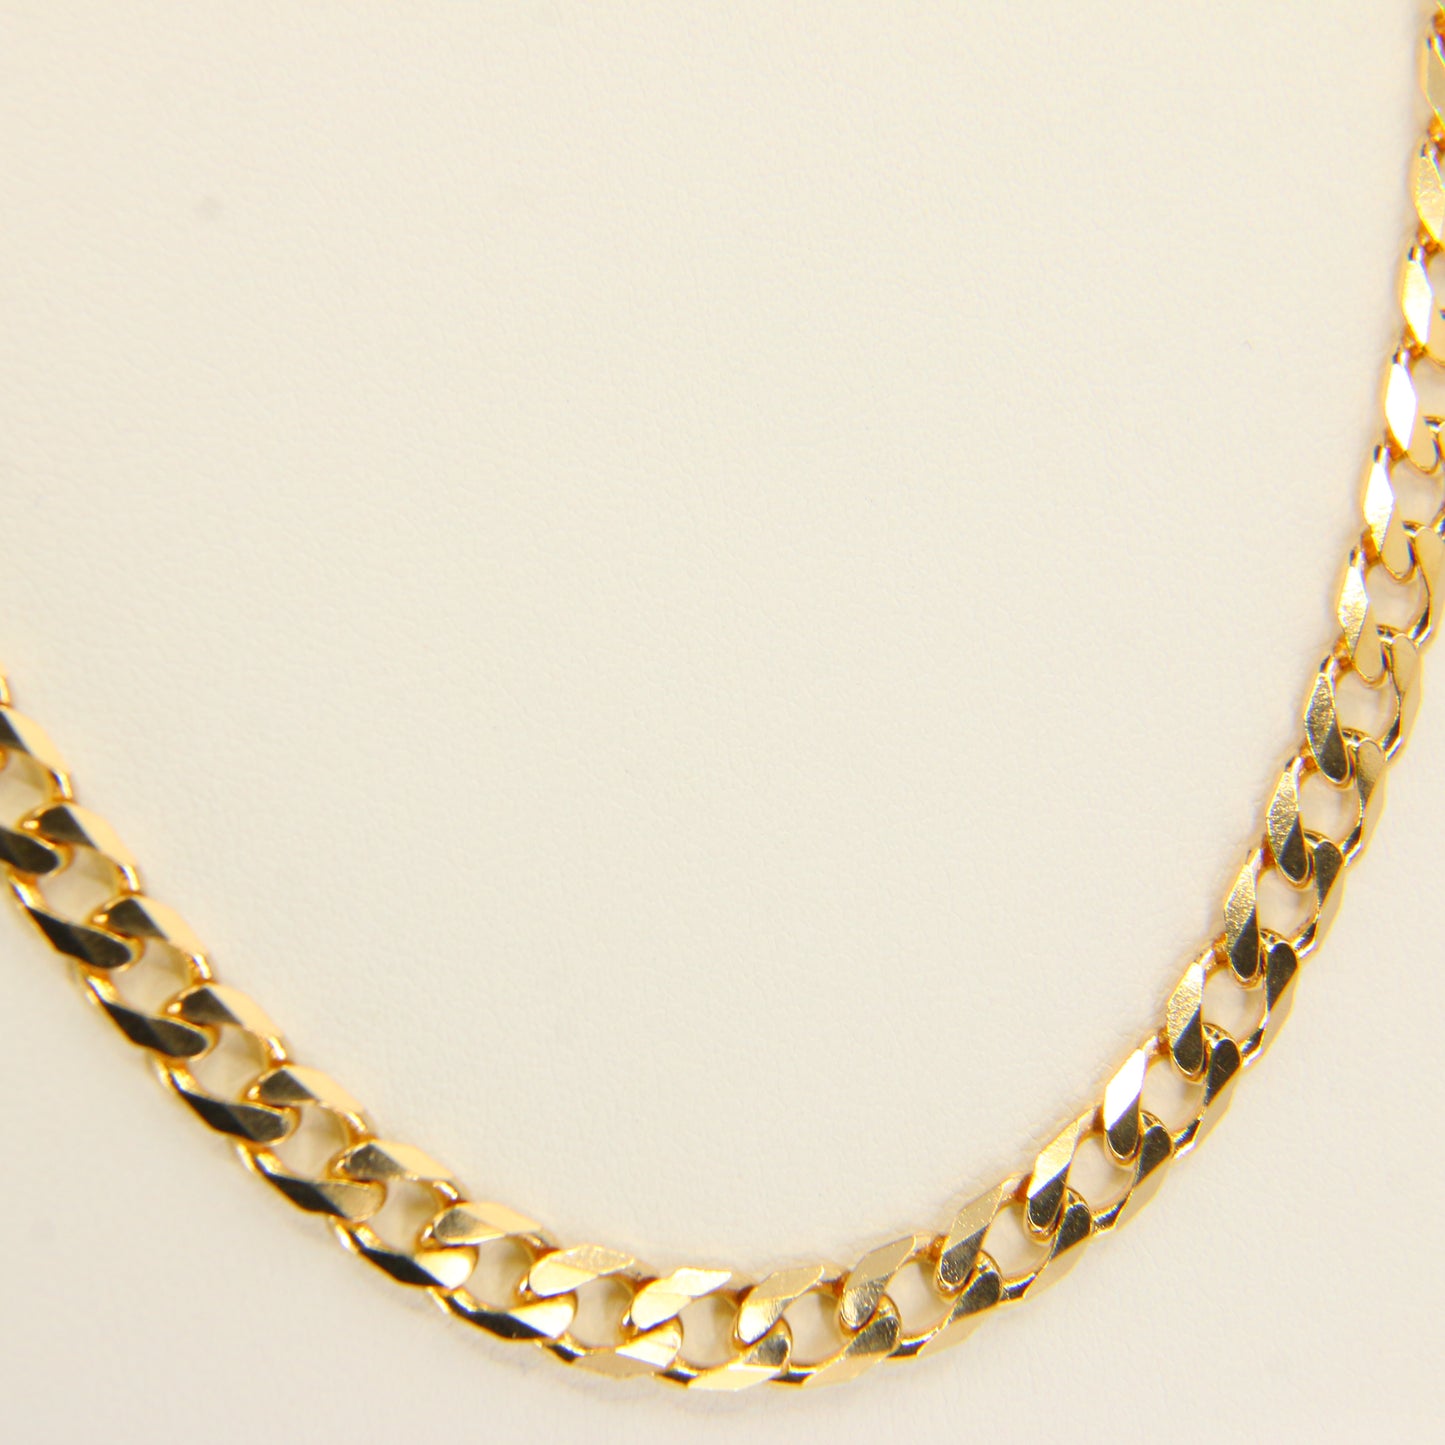 Vintage 9ct Heavy Solid Gold Chain Necklace Hallmarked Yellow Gold